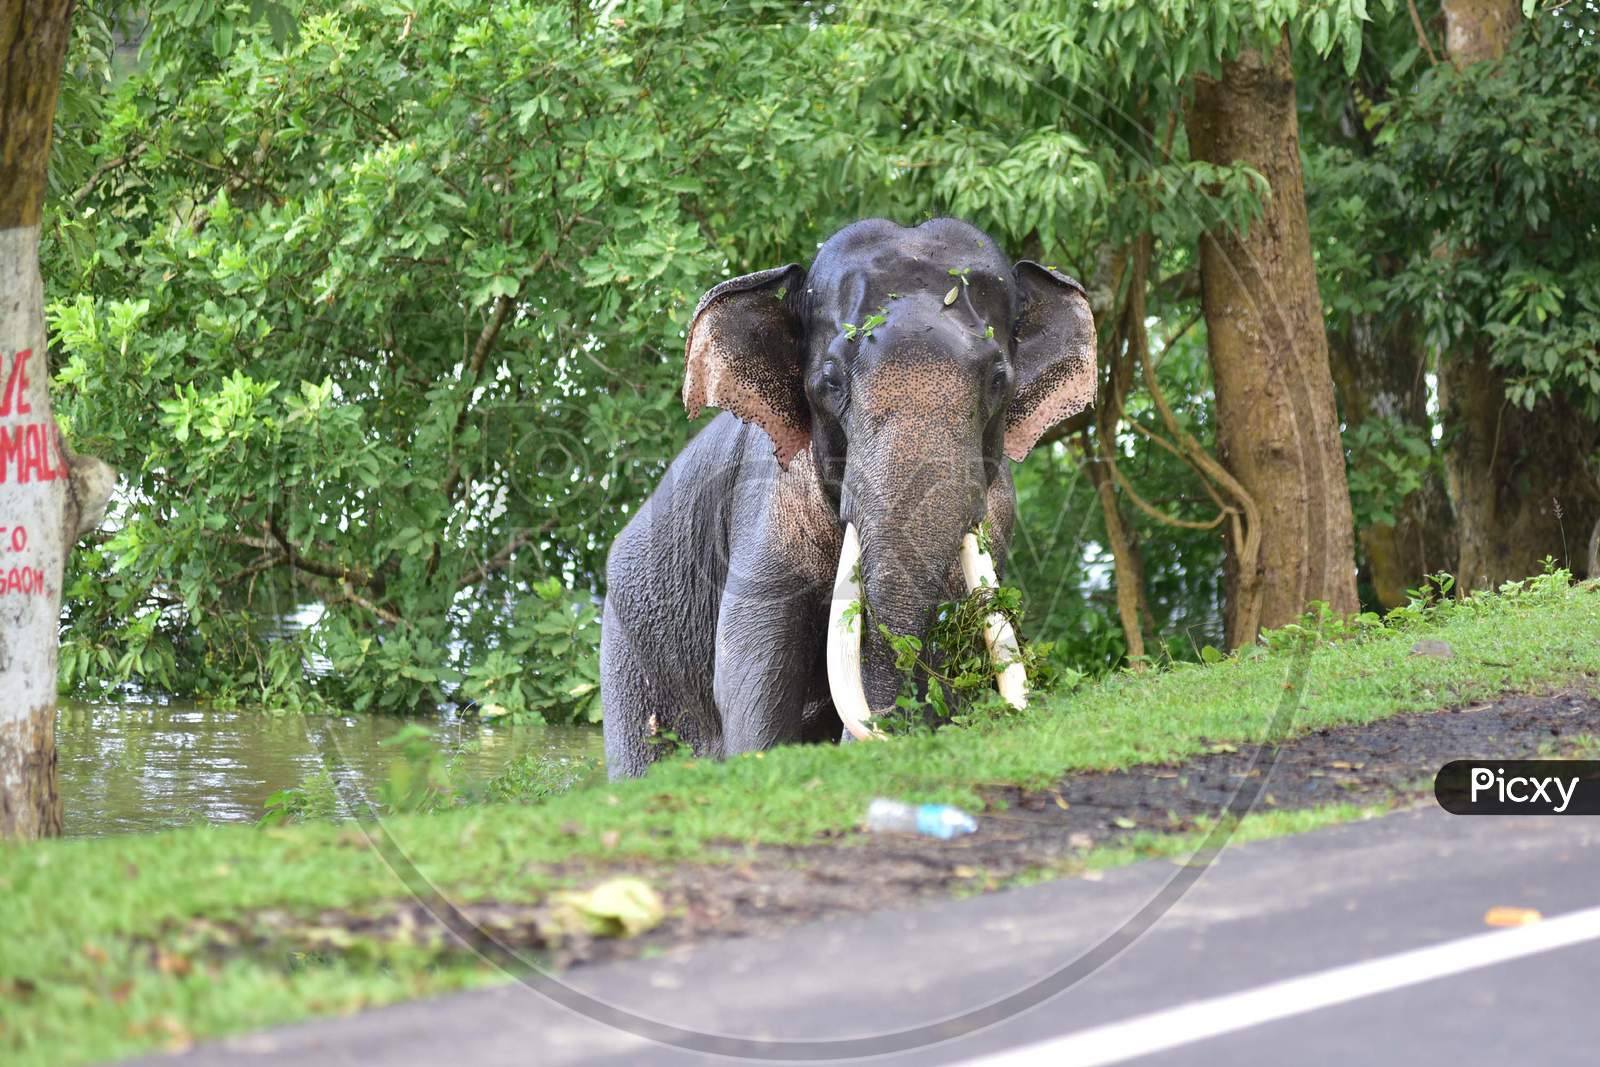 A wild elephant crosses a road to escape the floods in Kaziranga National Park in Nagaon, Assam on July 13, 2020